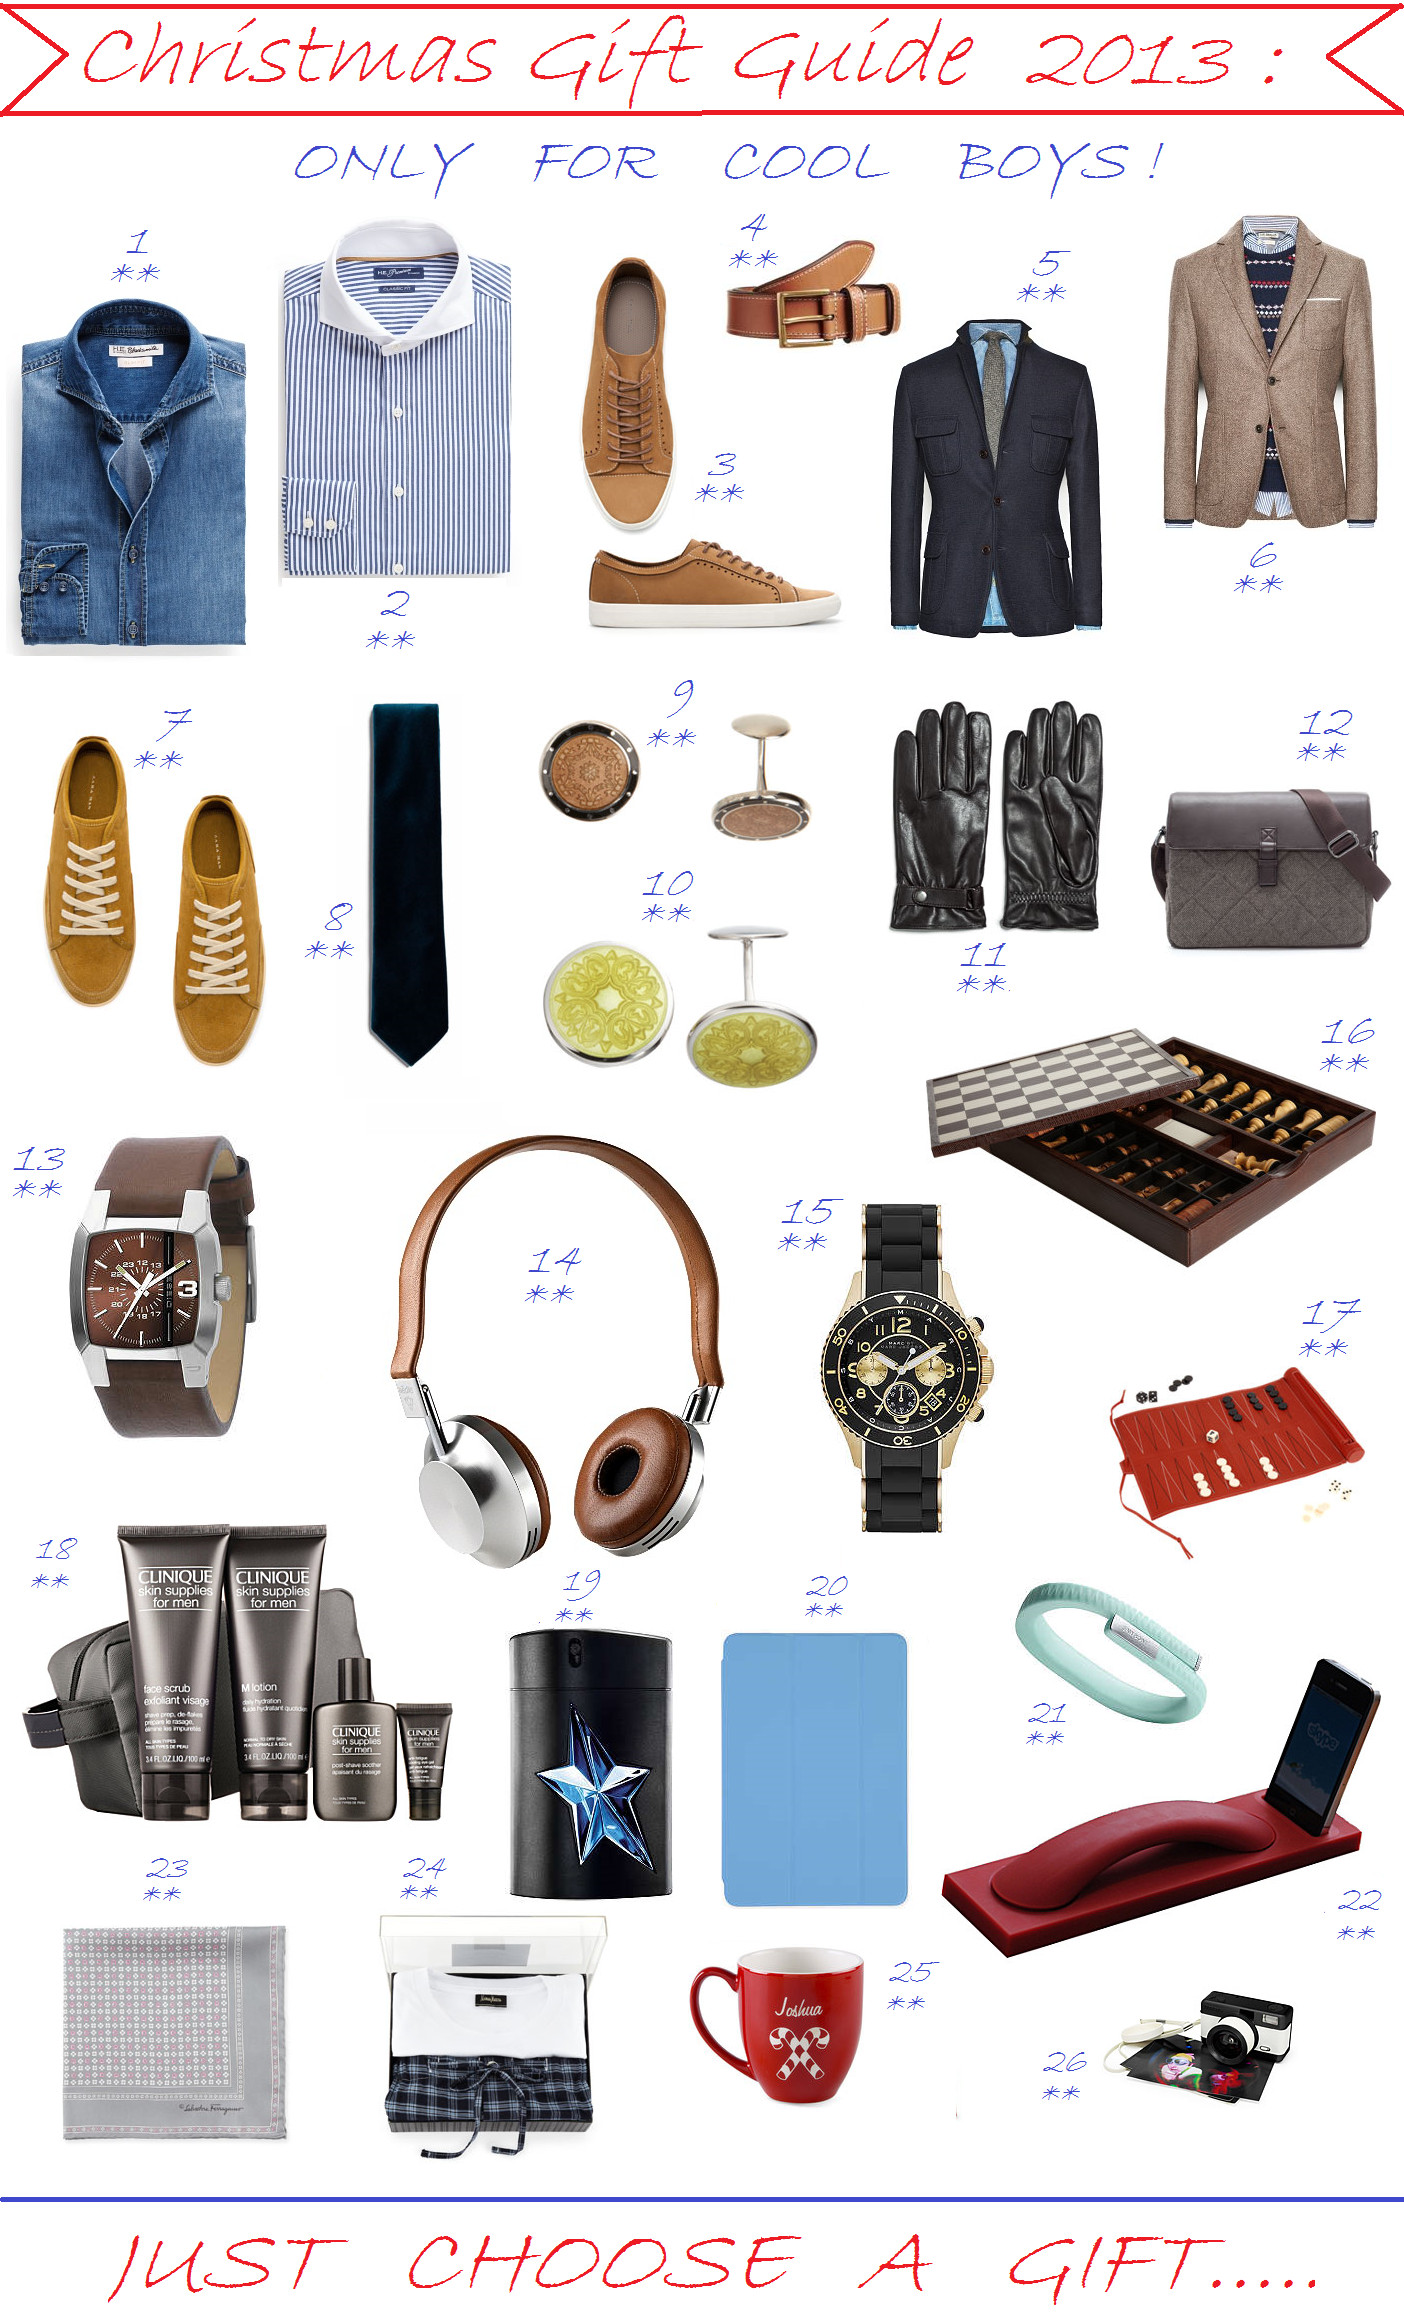 Good Gift Ideas For Boys
 CHRISTMAS GIFT GUIDE 2013 ONLY FOR COOL BOYS